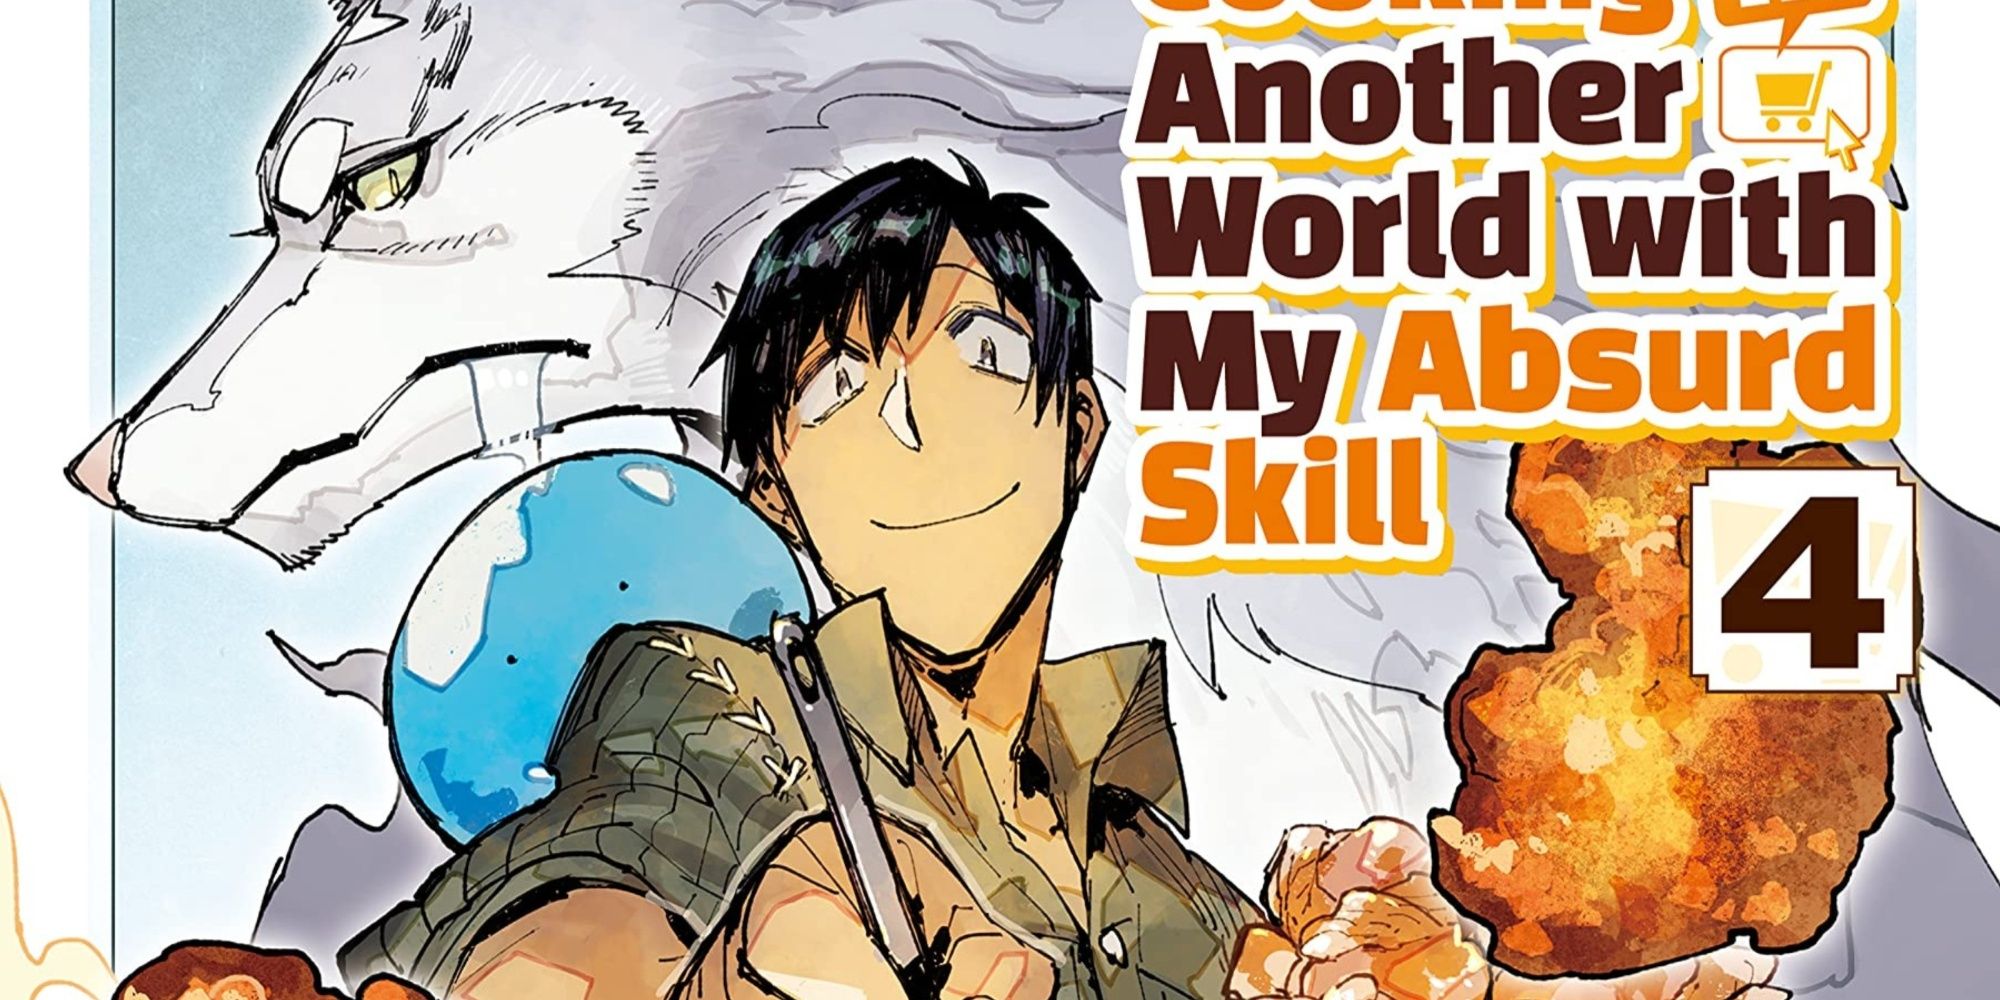 Tsuyoshi Mukouda from Campfire Cooking In Another World With My Absurd Skill Manga Cover